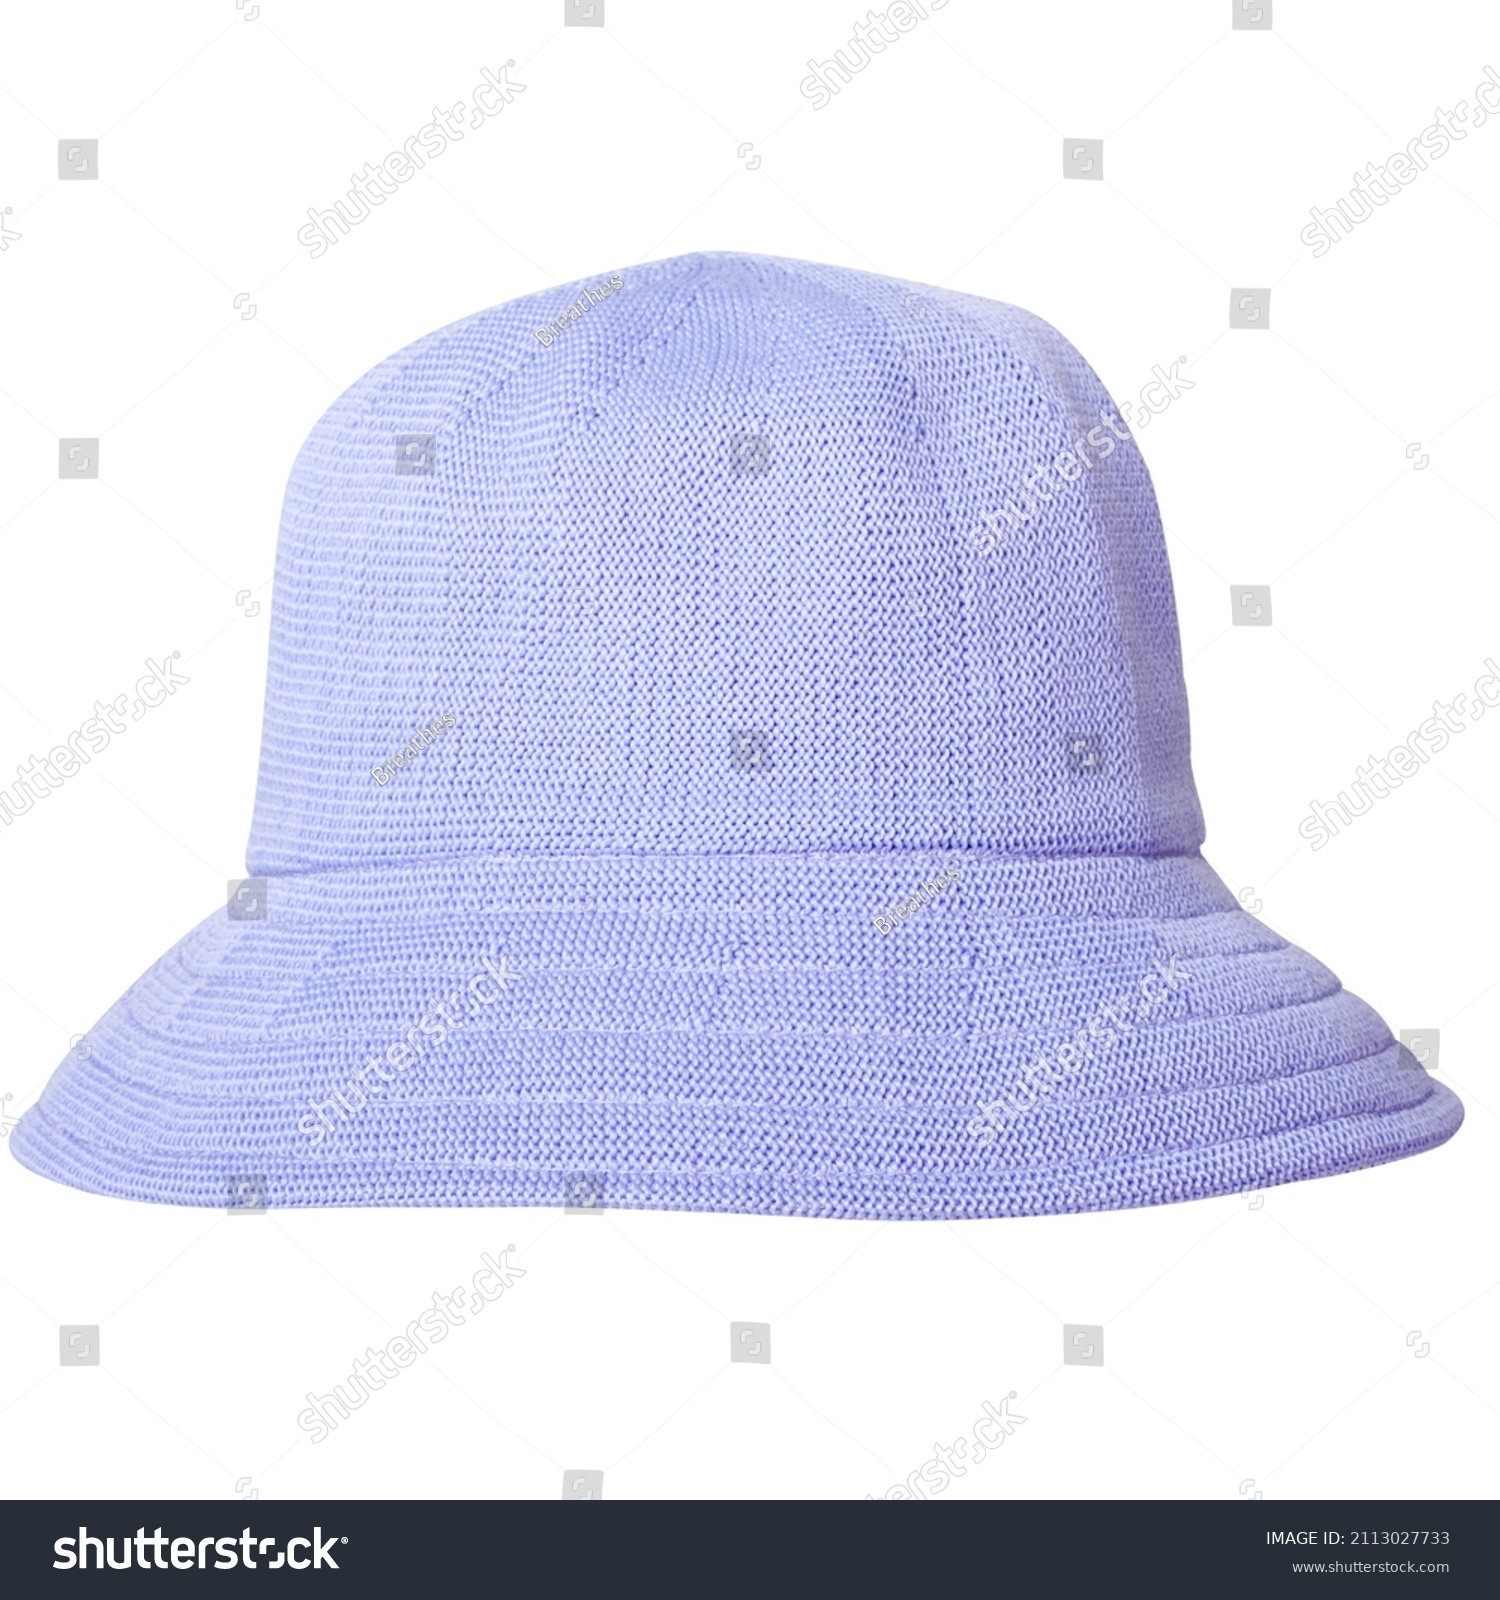 Stylish light blue violet summer hat or bucket hat for ladies or women. Woven cloche hat for girls on white background. Closeup. Detail. #2113027733